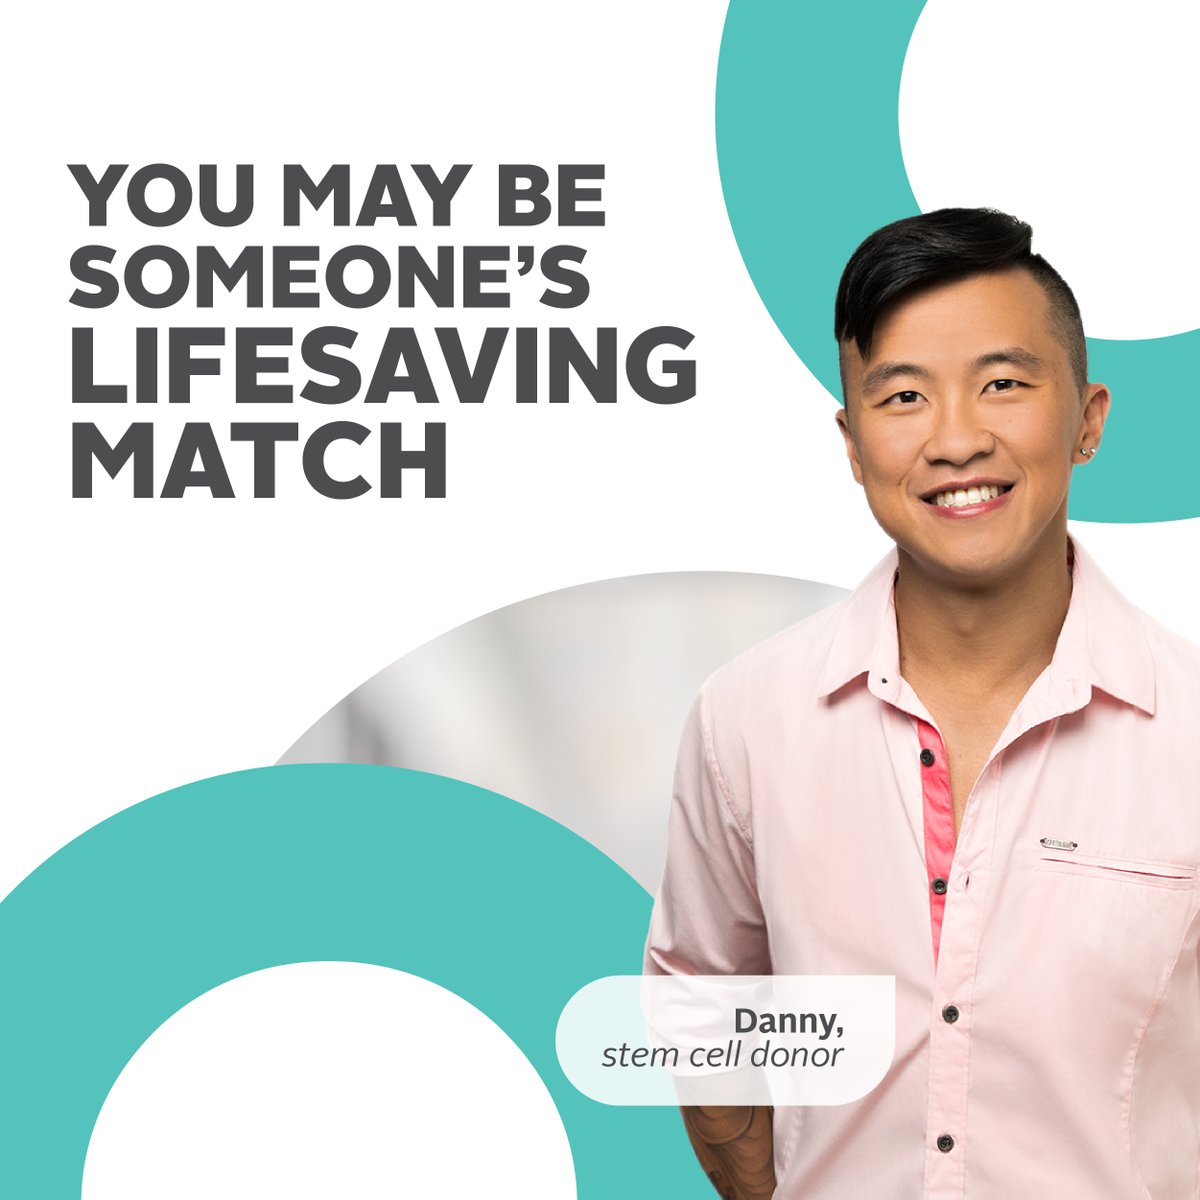 Every year, nearly 1,000 Canadian patients wait for a life-saving blood stem cell transplant. If you're 17-35 & in good health, you could be the rare match for a patient in need. Learn more & order your swab kit today by visiting ow.ly/OBmN50M5Lca